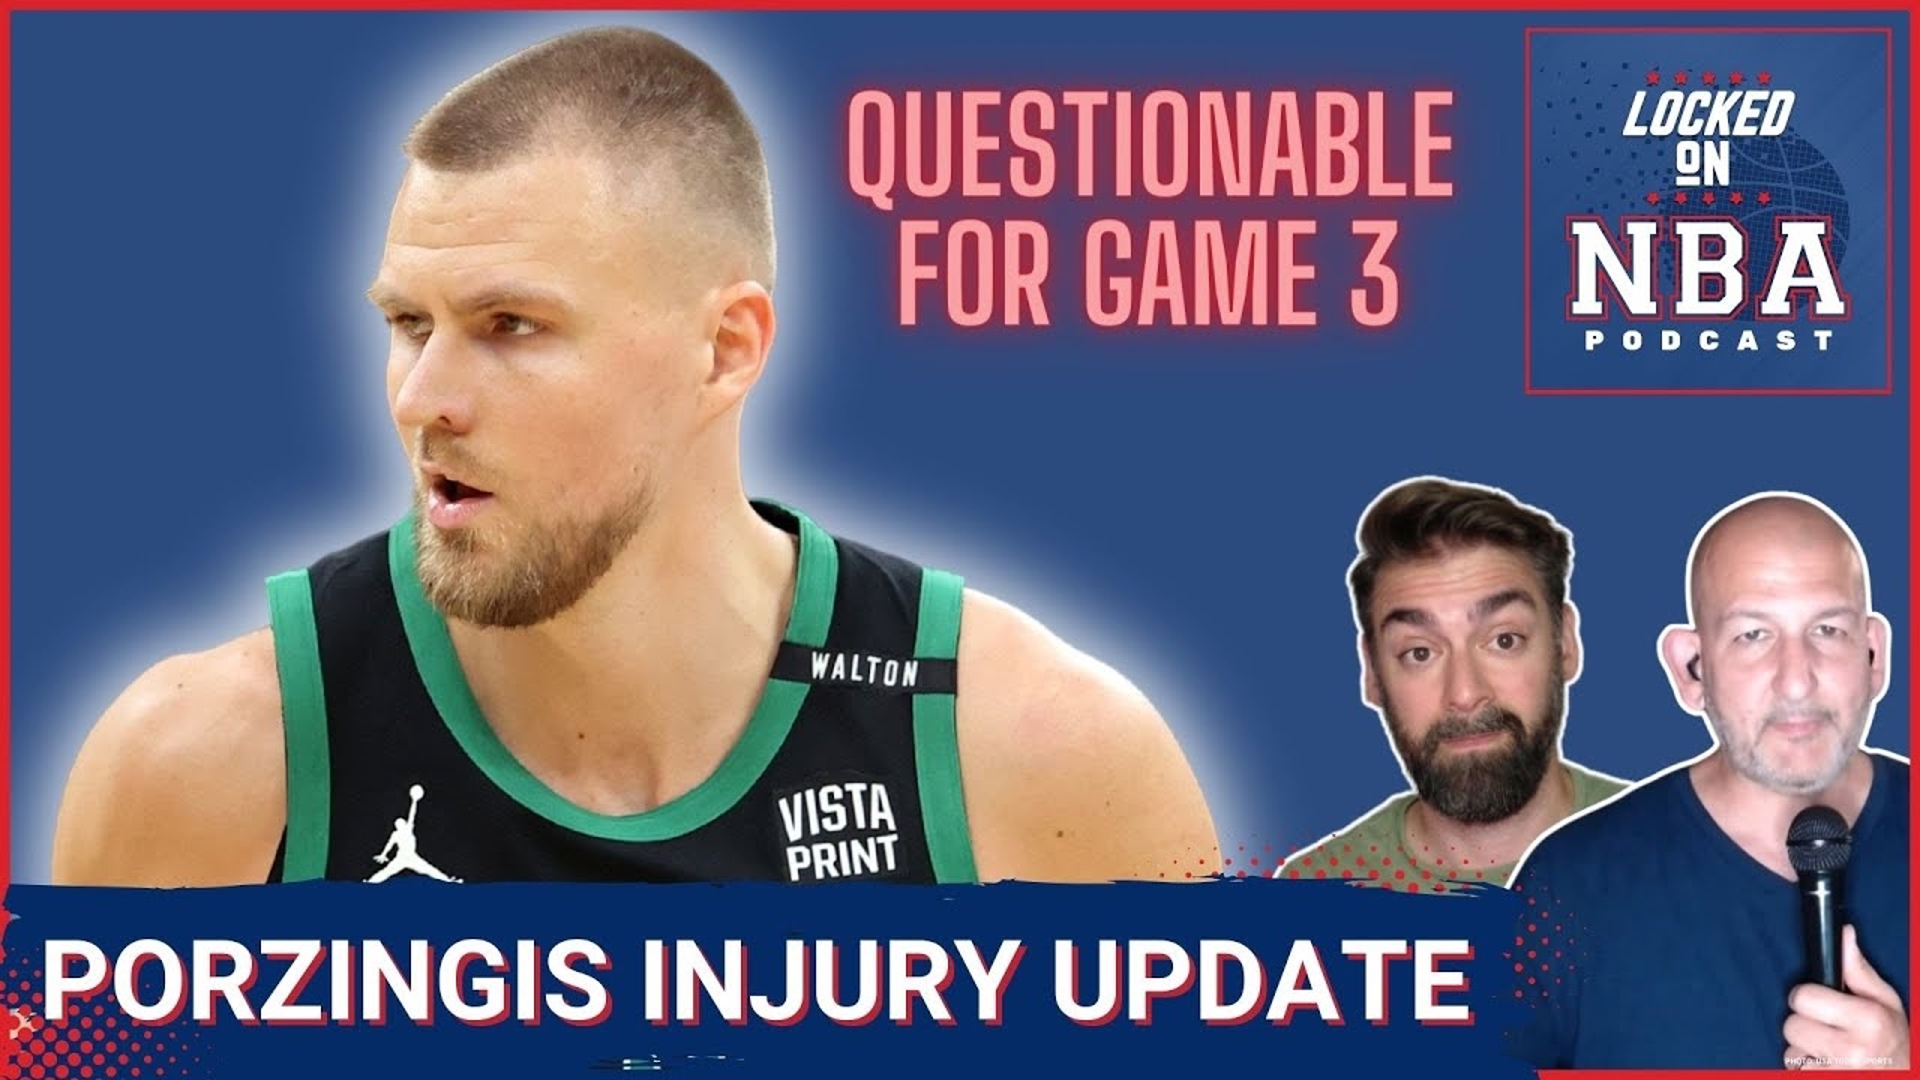 Breaking news as Kristaps Porzingis suffered a rare injury called a torn medial retinaculum allowing dislocation of the posterior tibialis tendon.